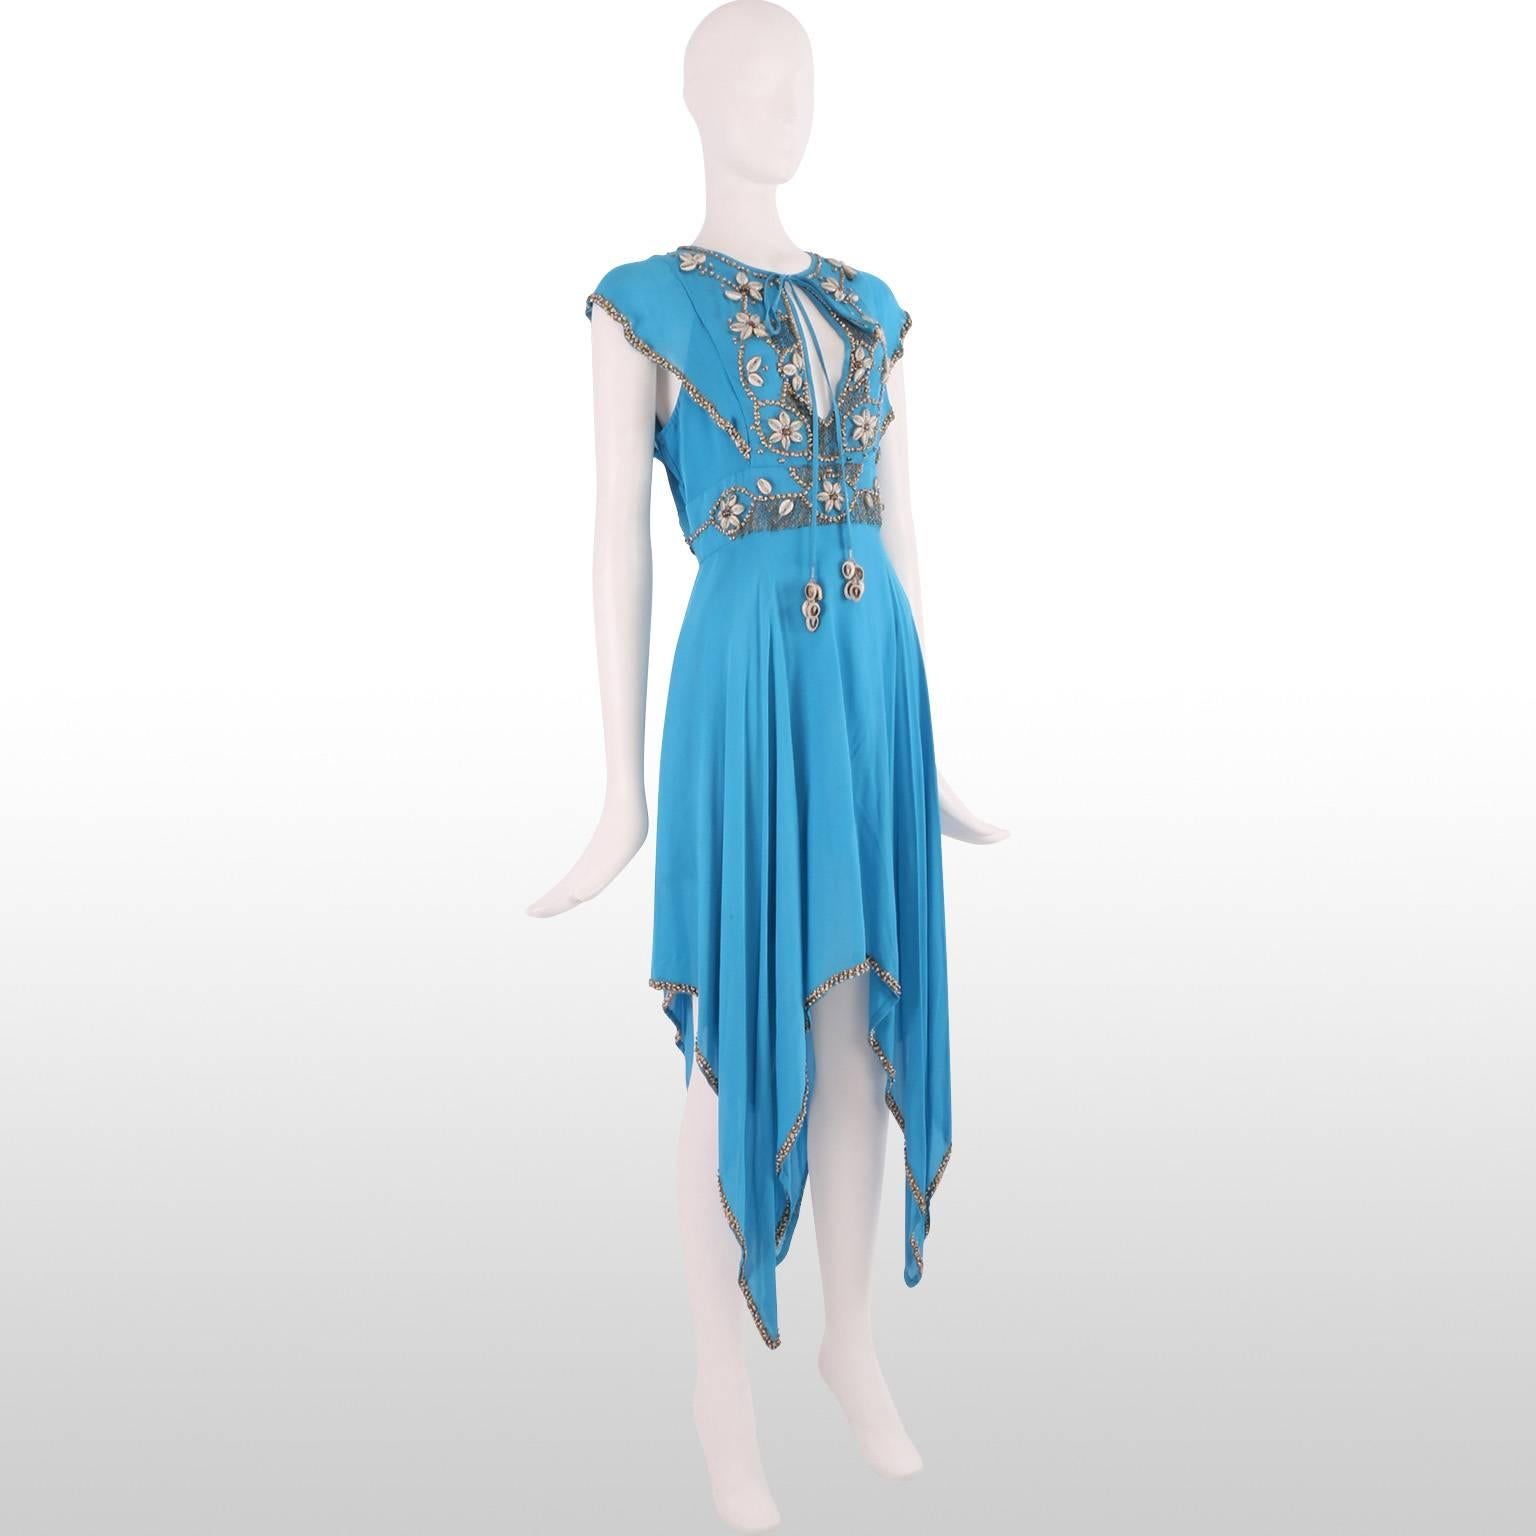 Boho style amazing blue dress designed by Matthew Williamson as part of his Spring 2005 Ready-To-Wear Collection. The dress features intricate shell beaded embroidery around the neck, décolletage and hem giving the piece a summery beachy feel. The